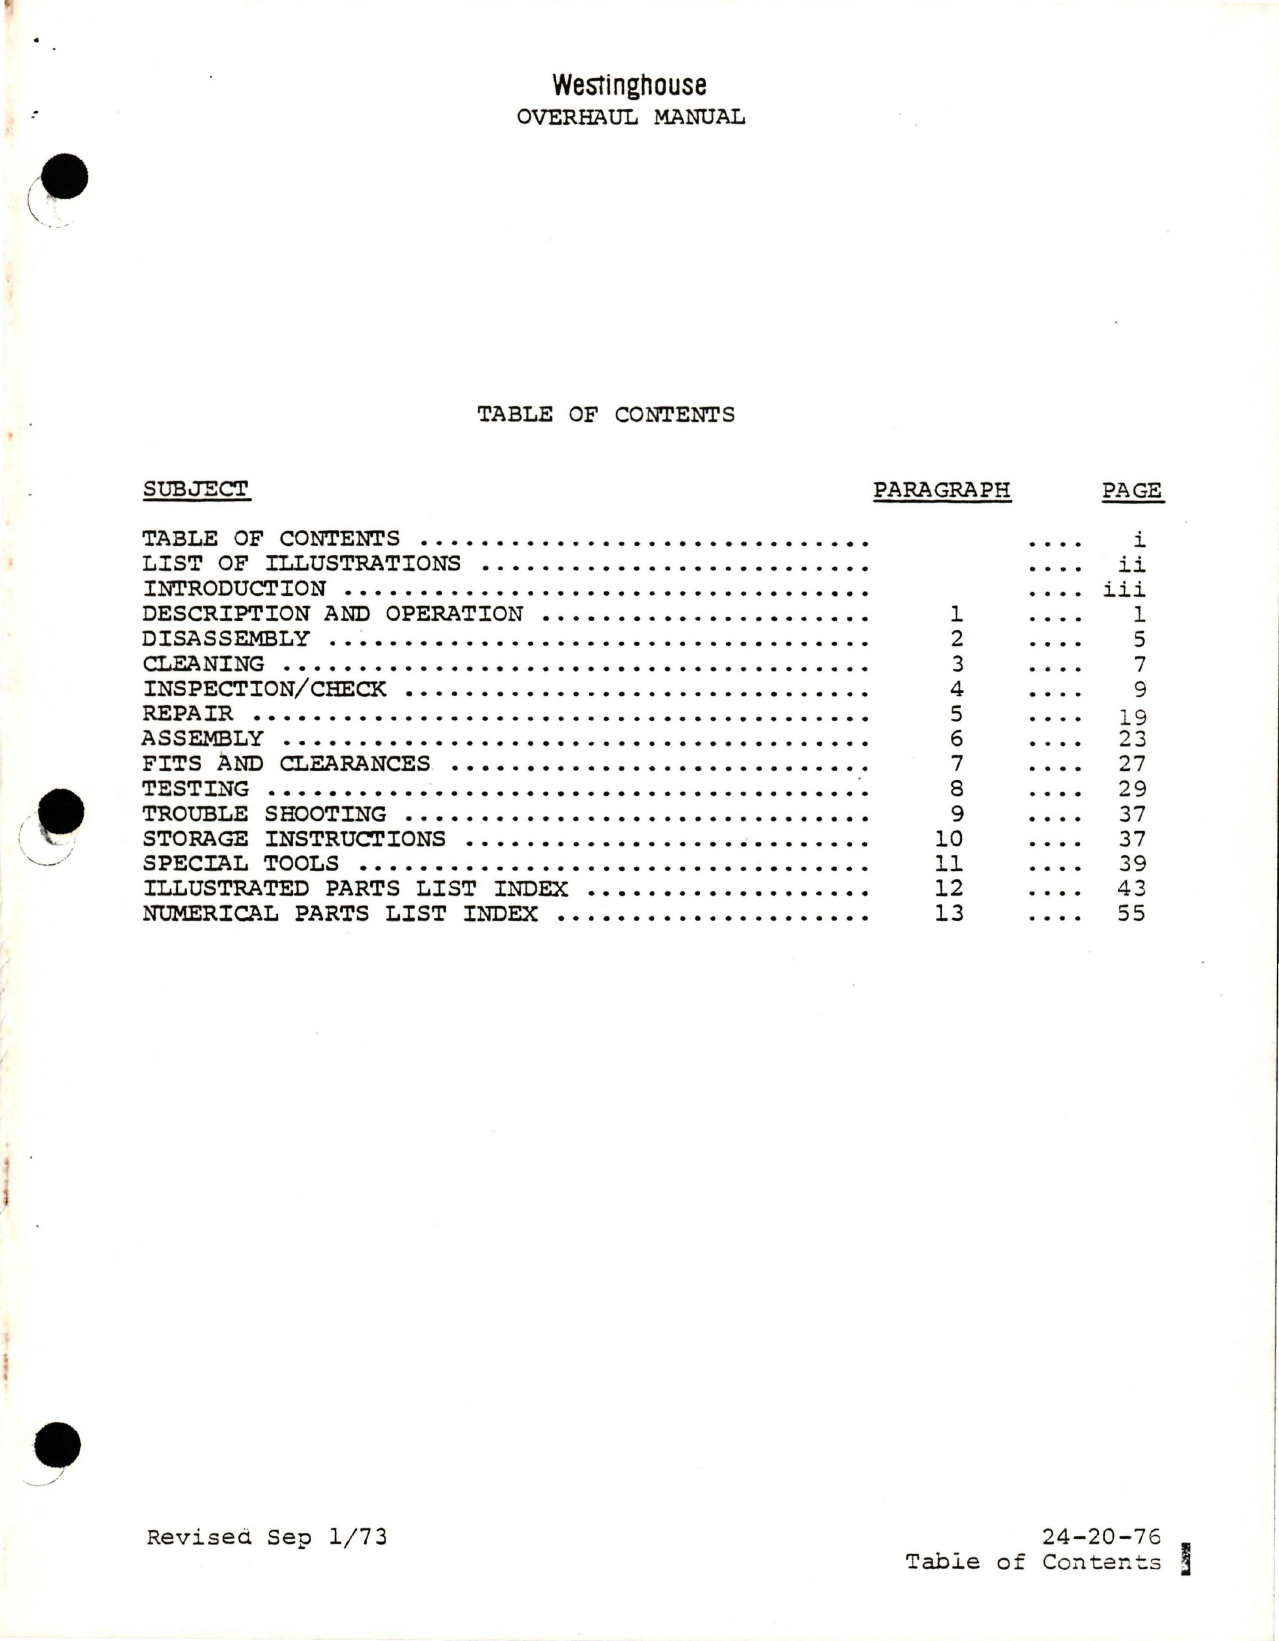 Sample page 9 from AirCorps Library document: Overhaul Manual for AC Generator - Parts 976J497-1 and 976J597-1 - Types 8QL30W and 8QL30X